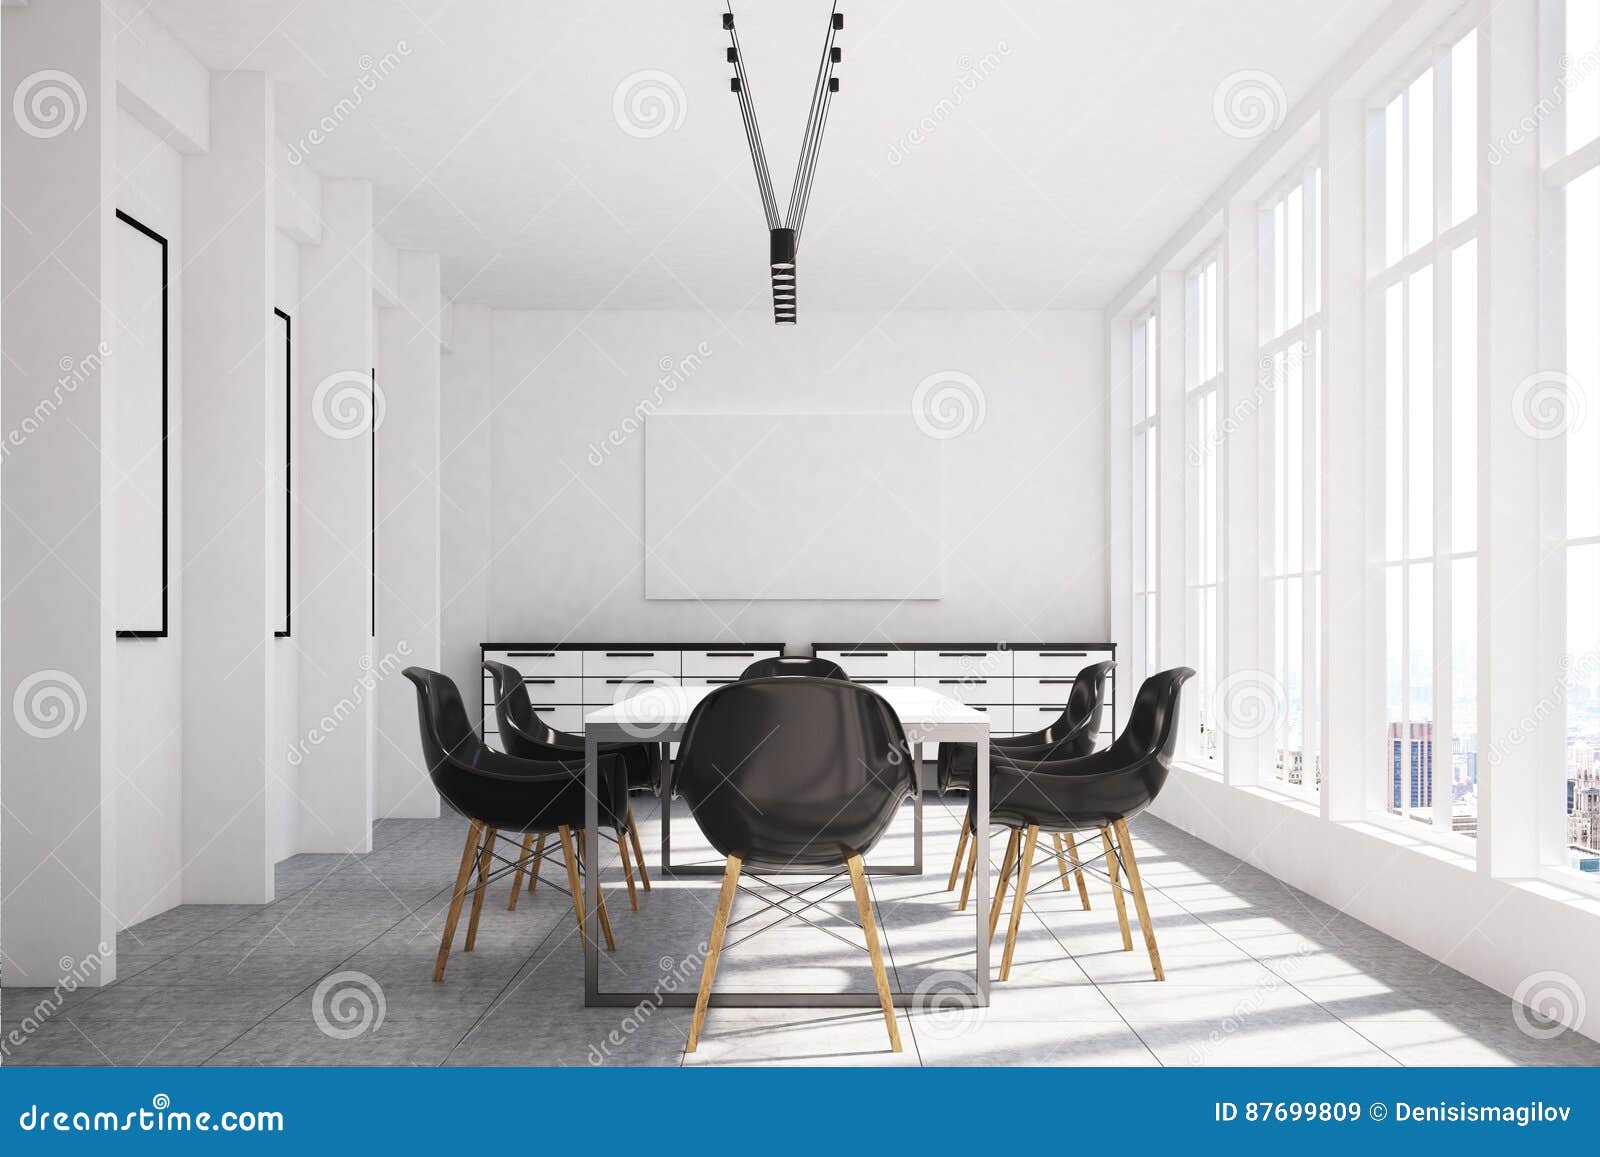 Office Meeting Room Interior With Posters Side Stock Illustration